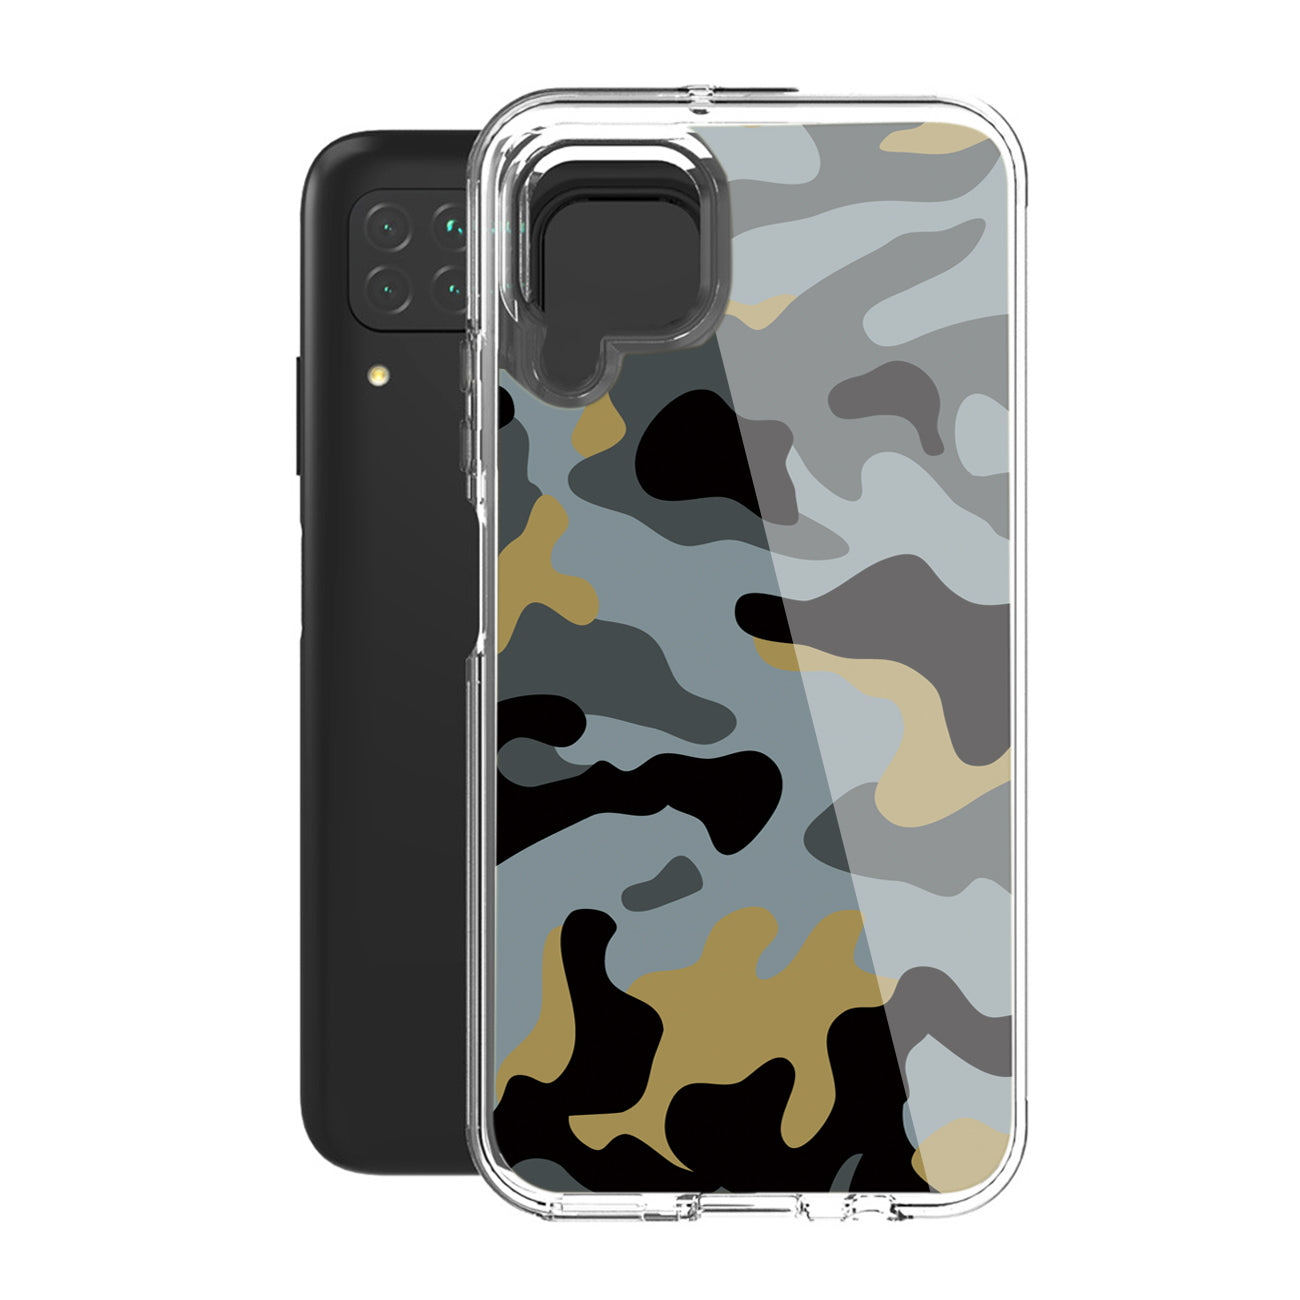 Camouflage Dual Layer Hybrid Hard & Soft TPU Rubber Case for SAMS GALAXY A12 5G In Blue